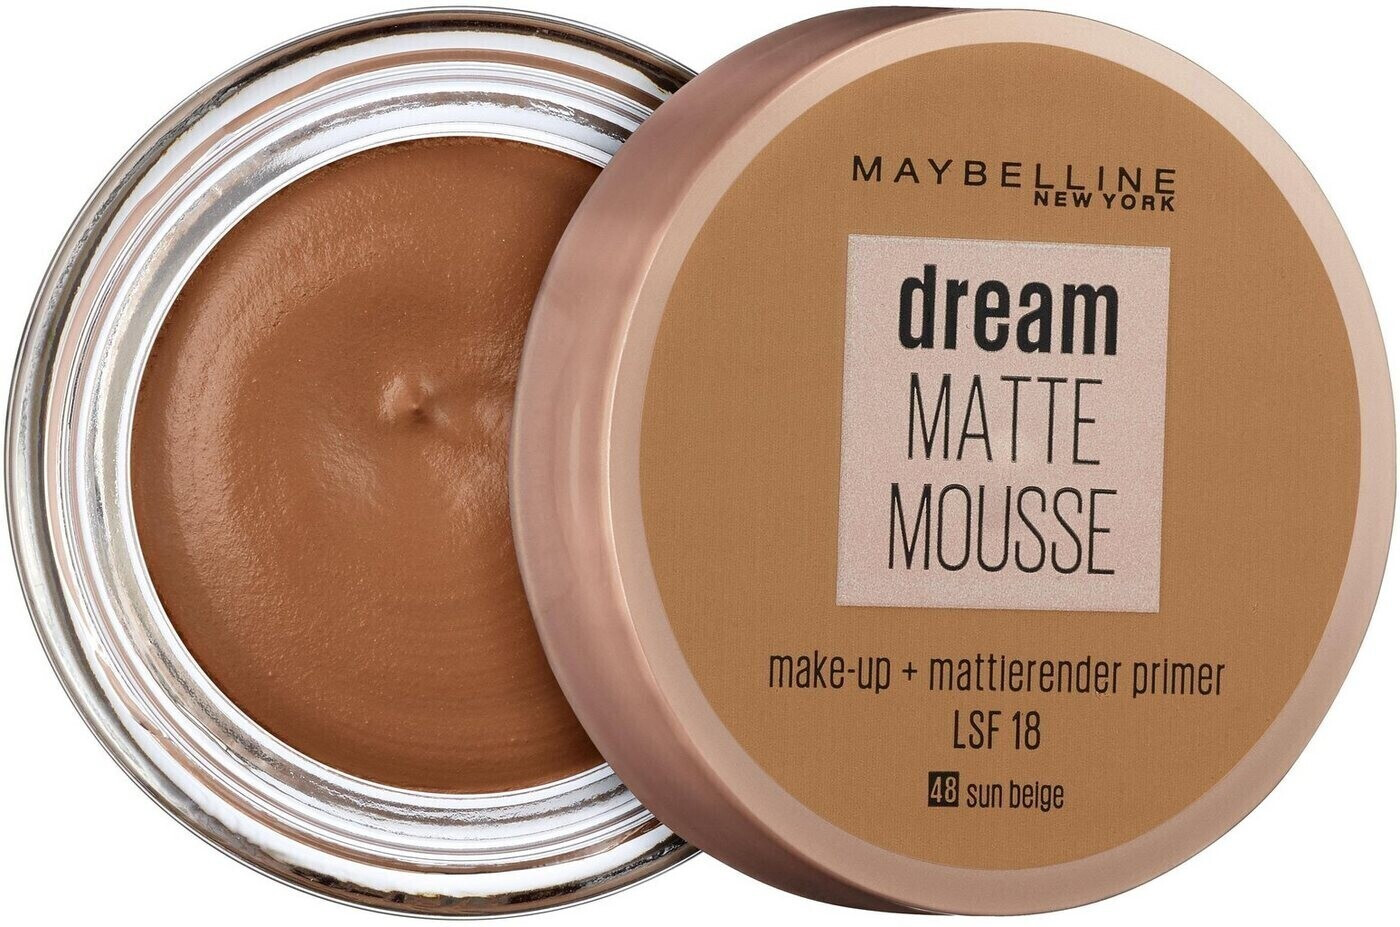 Buy Maybelline Dream Matte Mousse Make-Up - 48 Sun Beige (18 ml) from £9.99  (Today) – Best Deals on